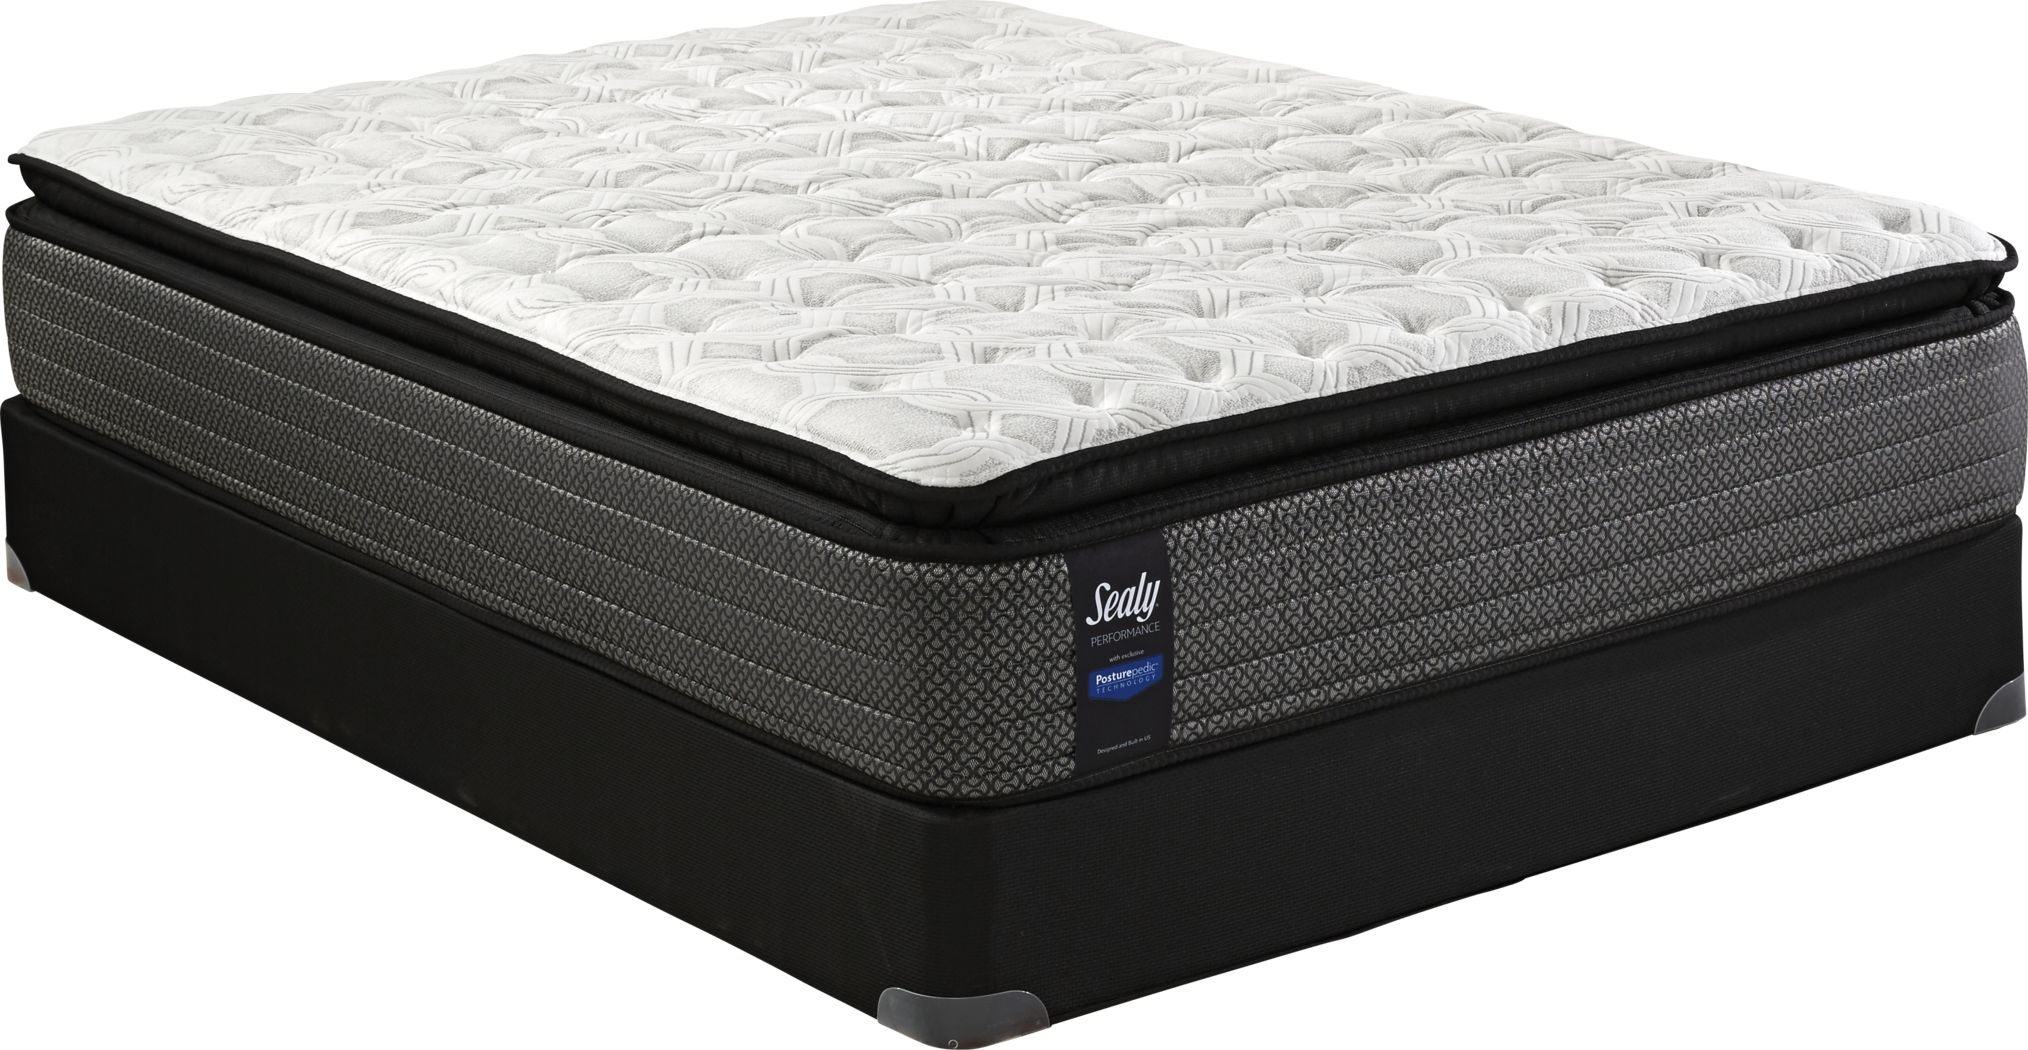 sealy crystal mattress review